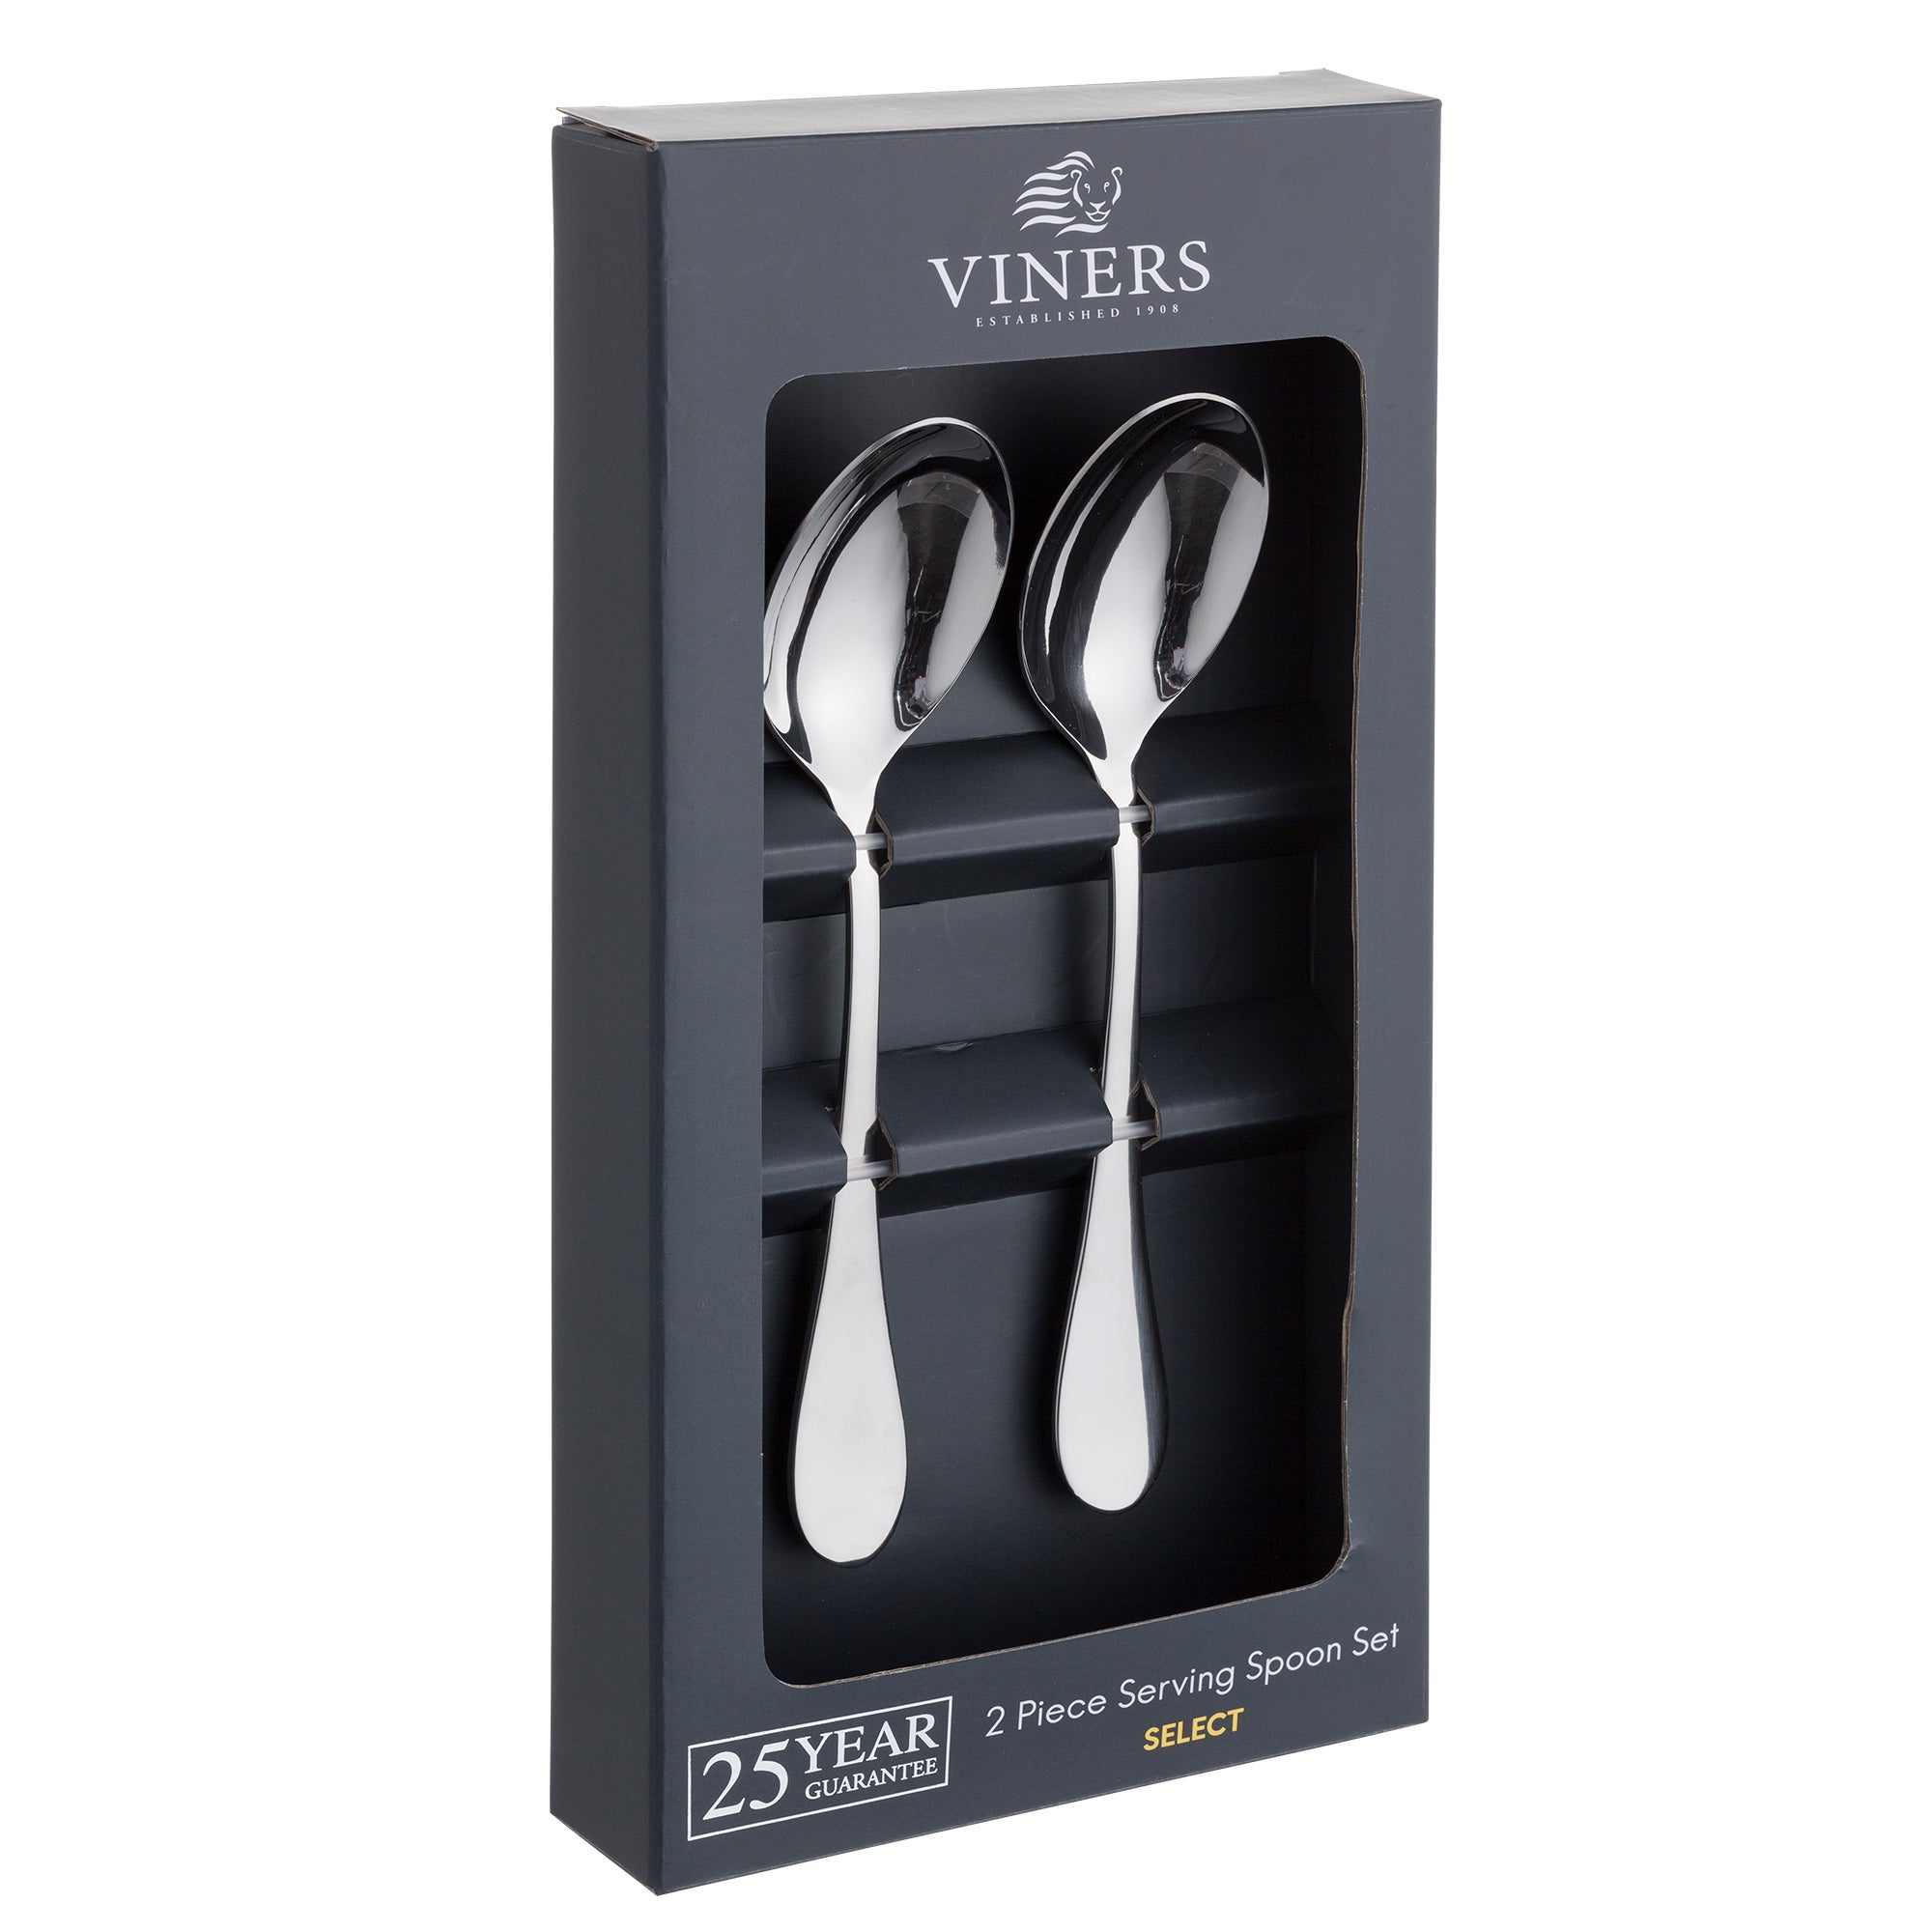 Viners Select Set of 2 Serving Spoons